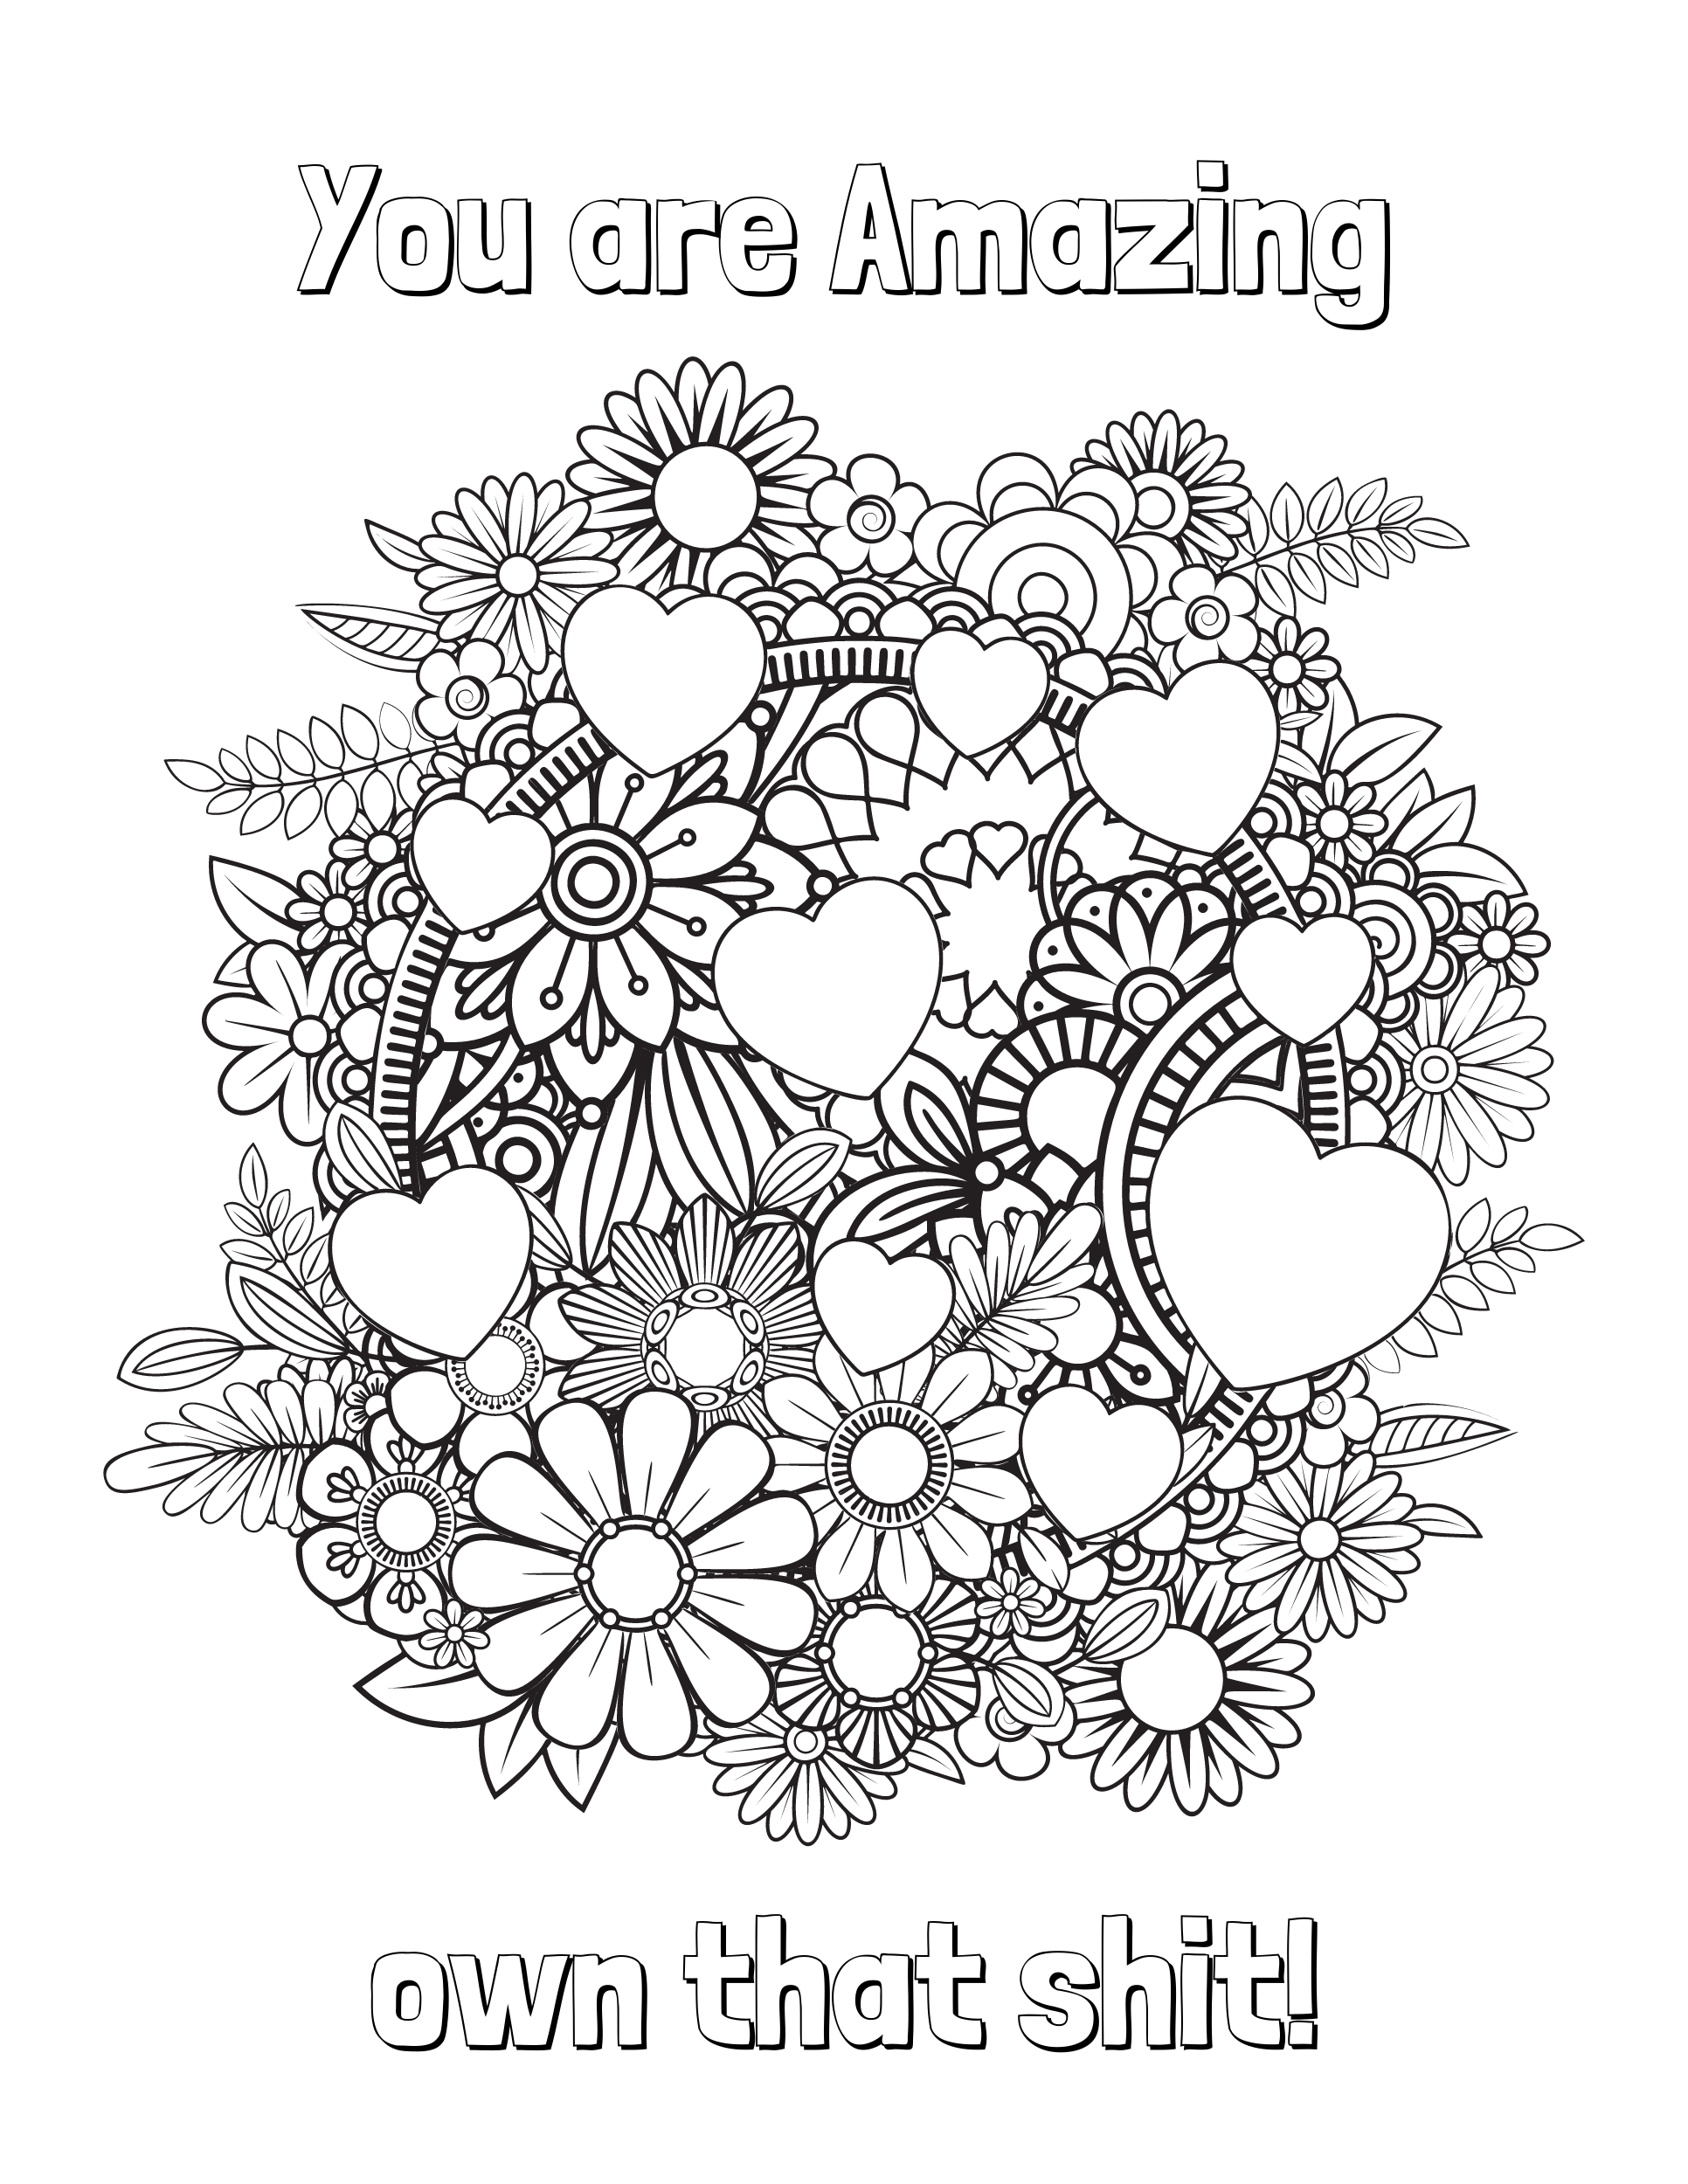 Sexy Cute And Funny Nicknames For Boobies Adult Swear Coloring